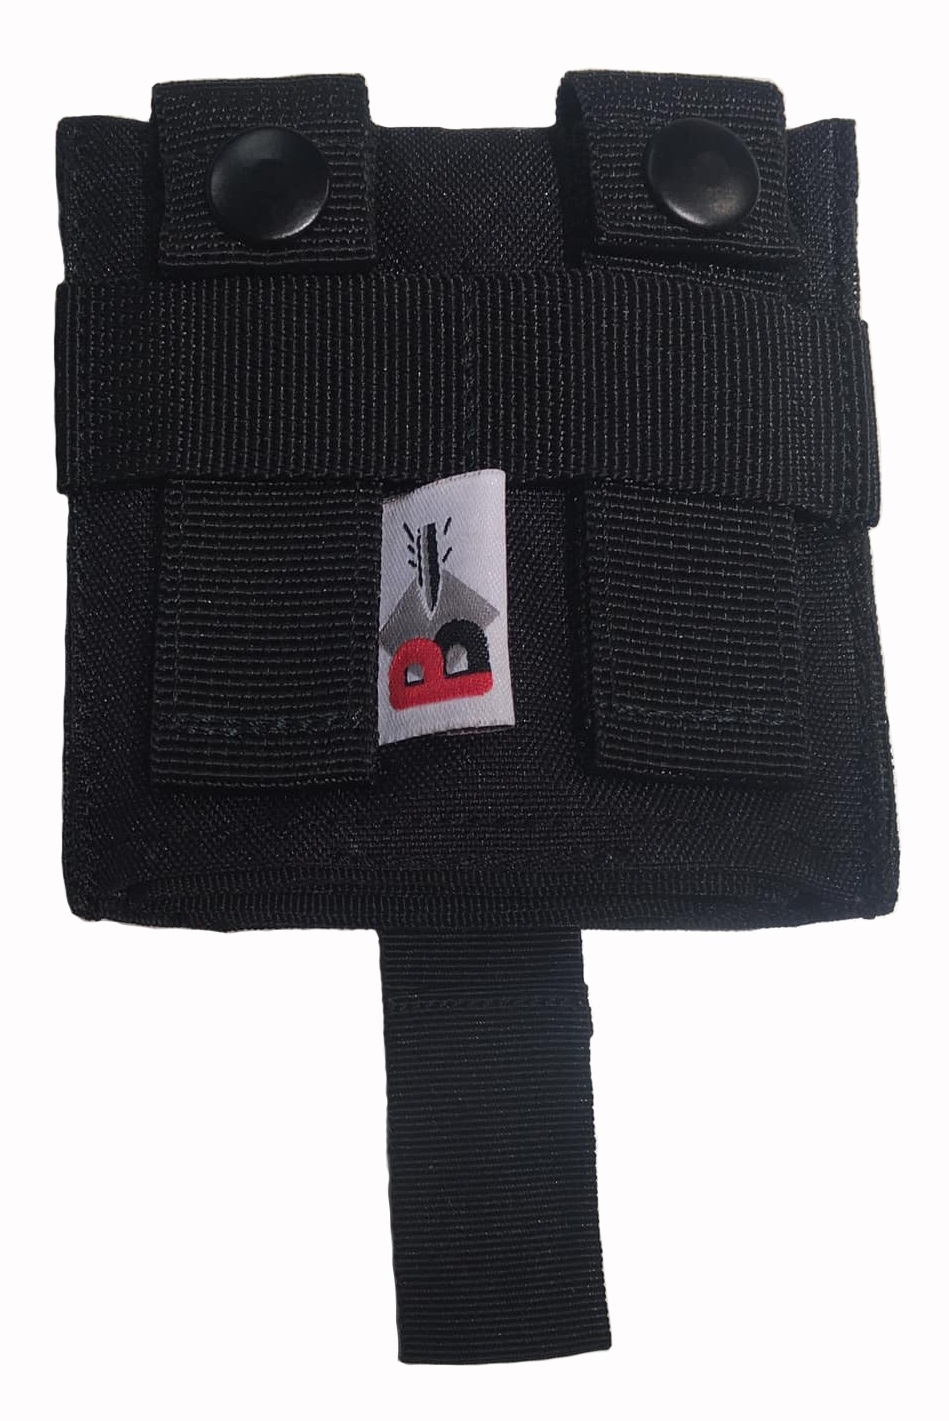 Belprotect Dump Pouch Light